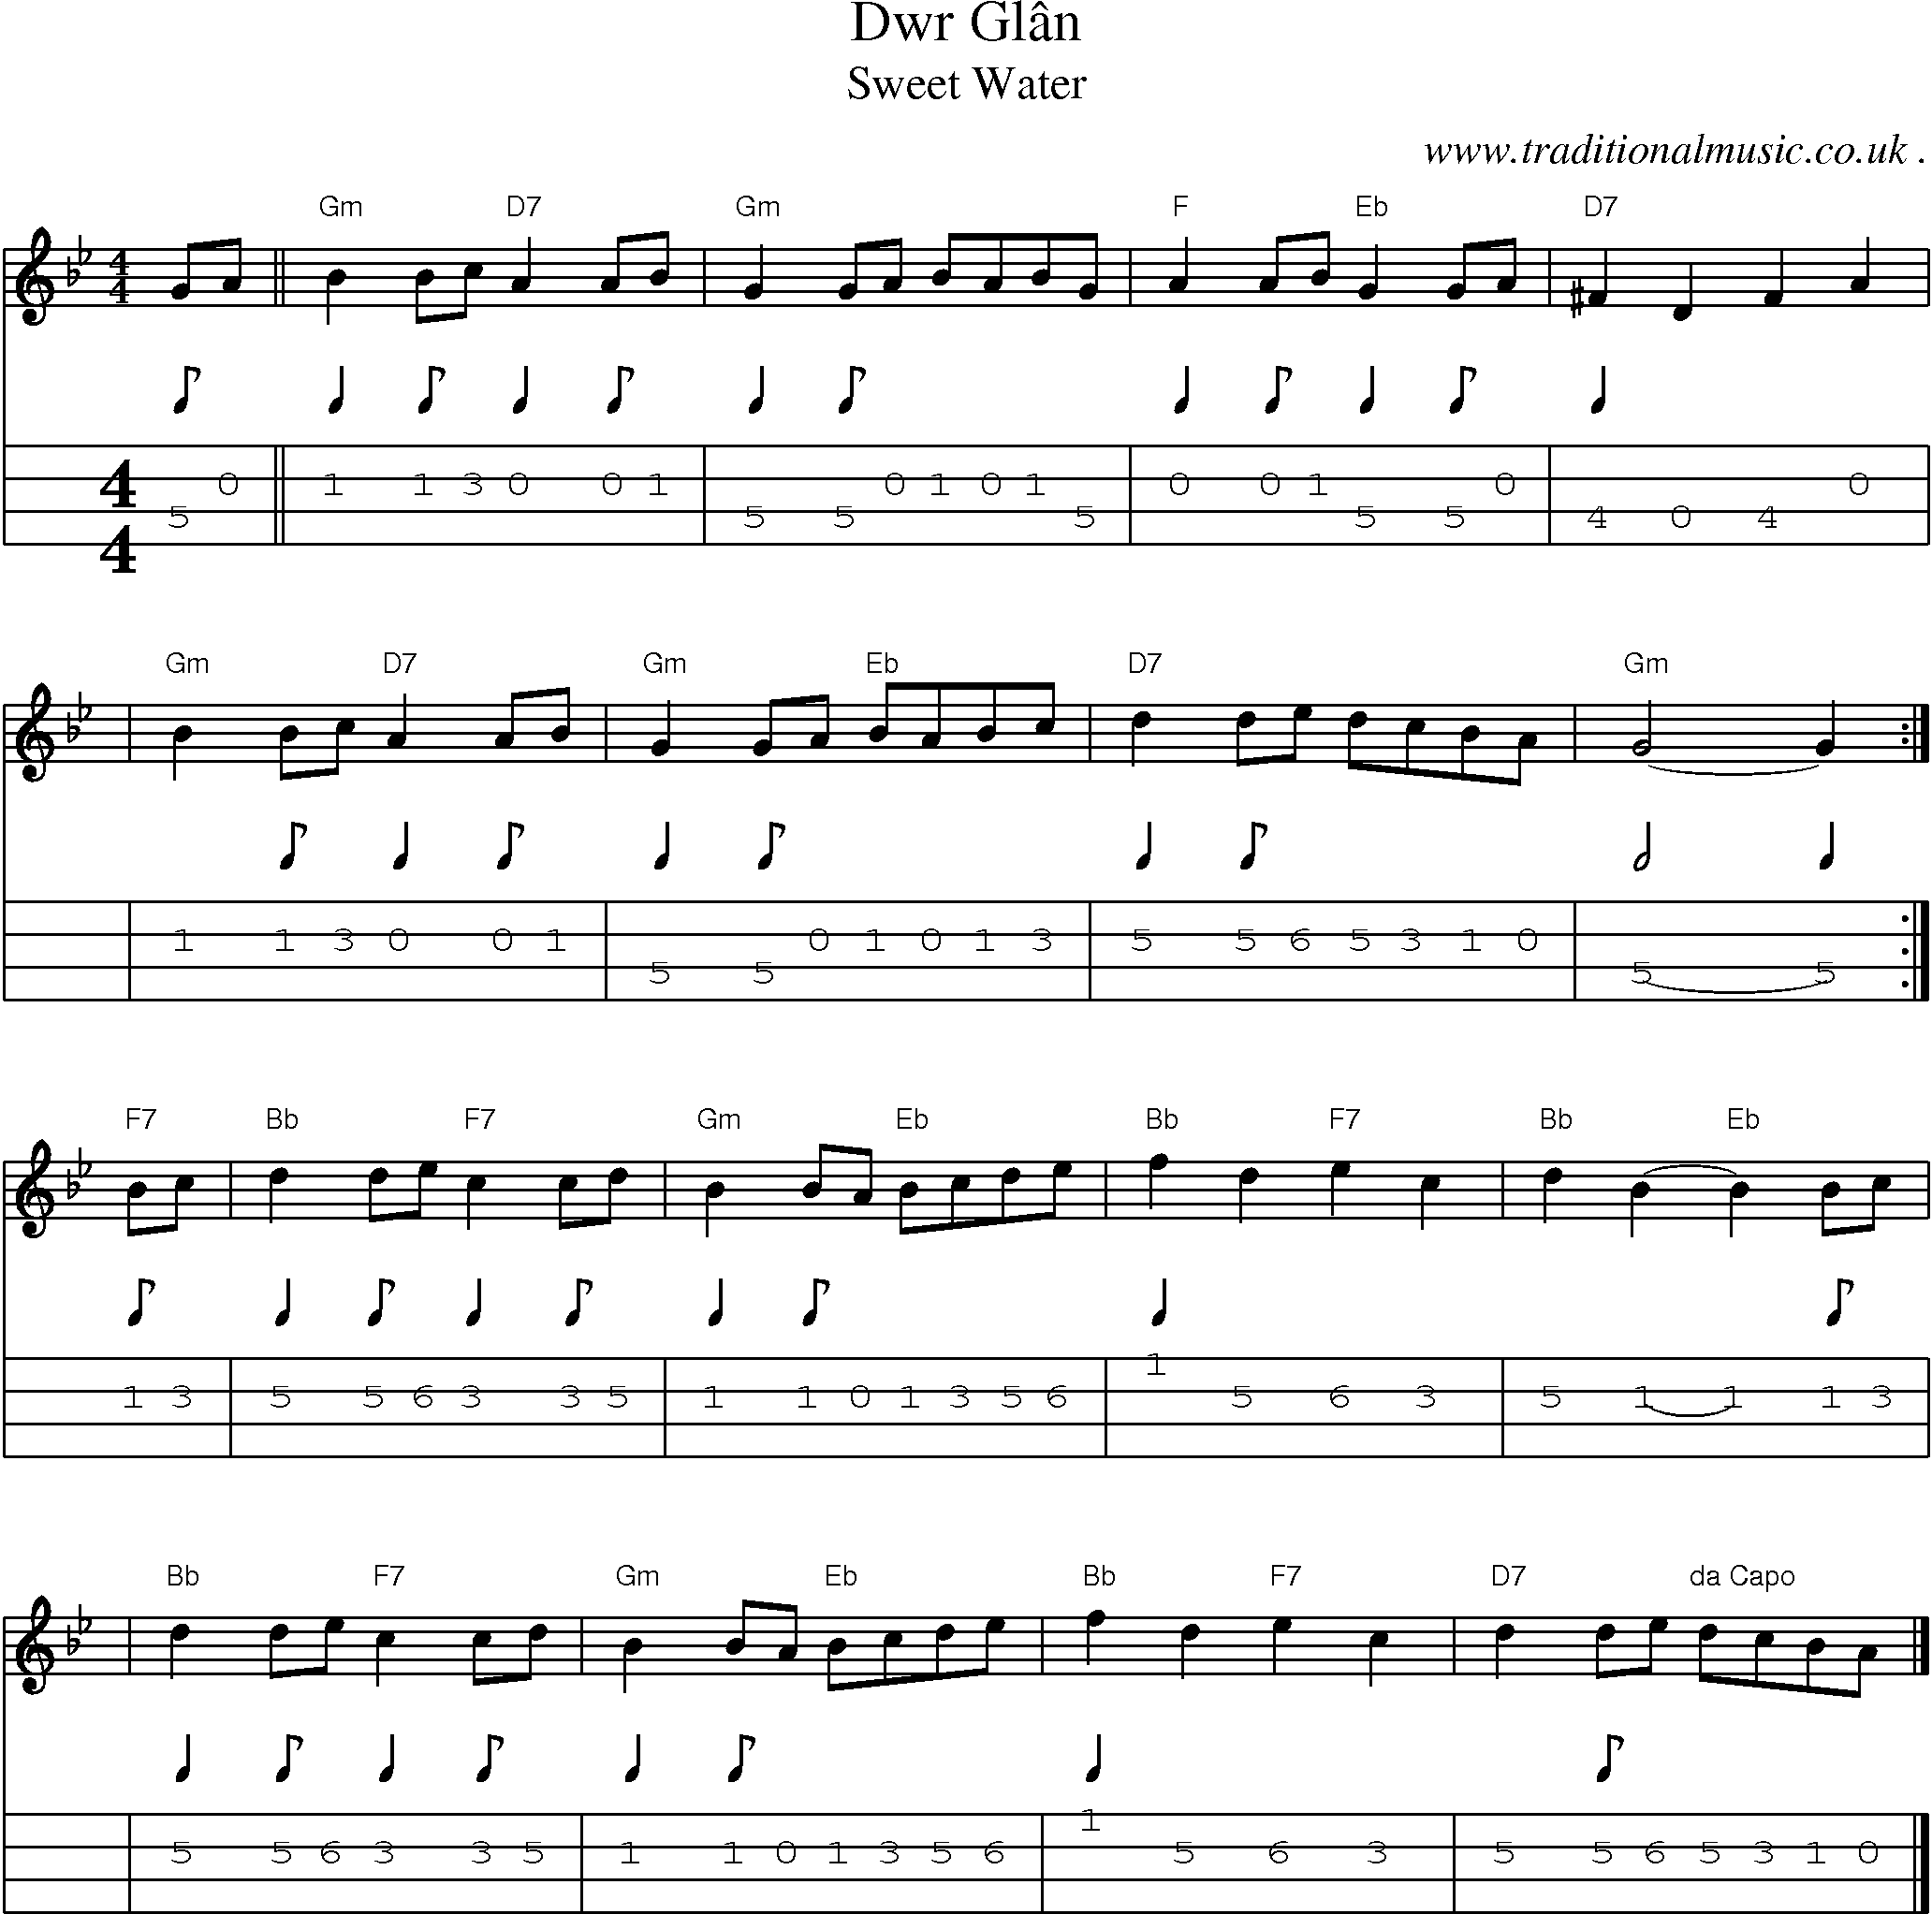 Sheet-music  score, Chords and Mandolin Tabs for Dwr Glan